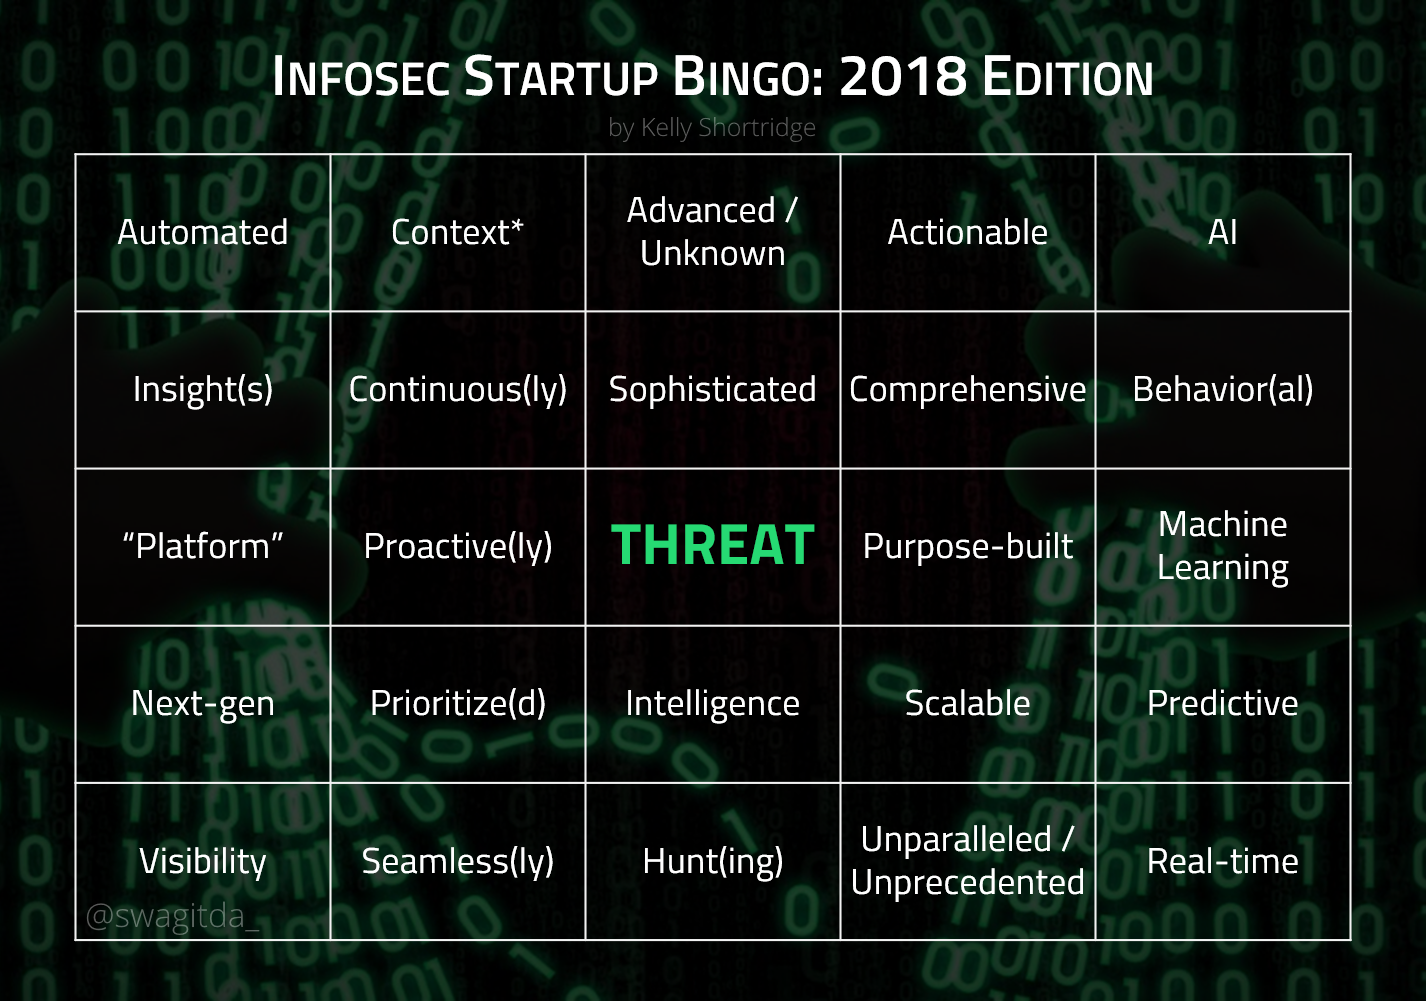 Infosec Startup Buzzword Bingo card for 2018. The buzzwords, from top left to bottom right, include: Automated. Context. Advanced and Unknown. Actionable. AI. Insights. Continuous. Sophisticated. Comprehensive. Behavioral. Platform. Proactive. Threat (the center square). Purpose-built. Machine learning. Next-gen. Prioritize. Intelligence. Scalable. Predictive. Visibility. Seamless. Hunt. Unparalleled and Unprecedented. Real-time.